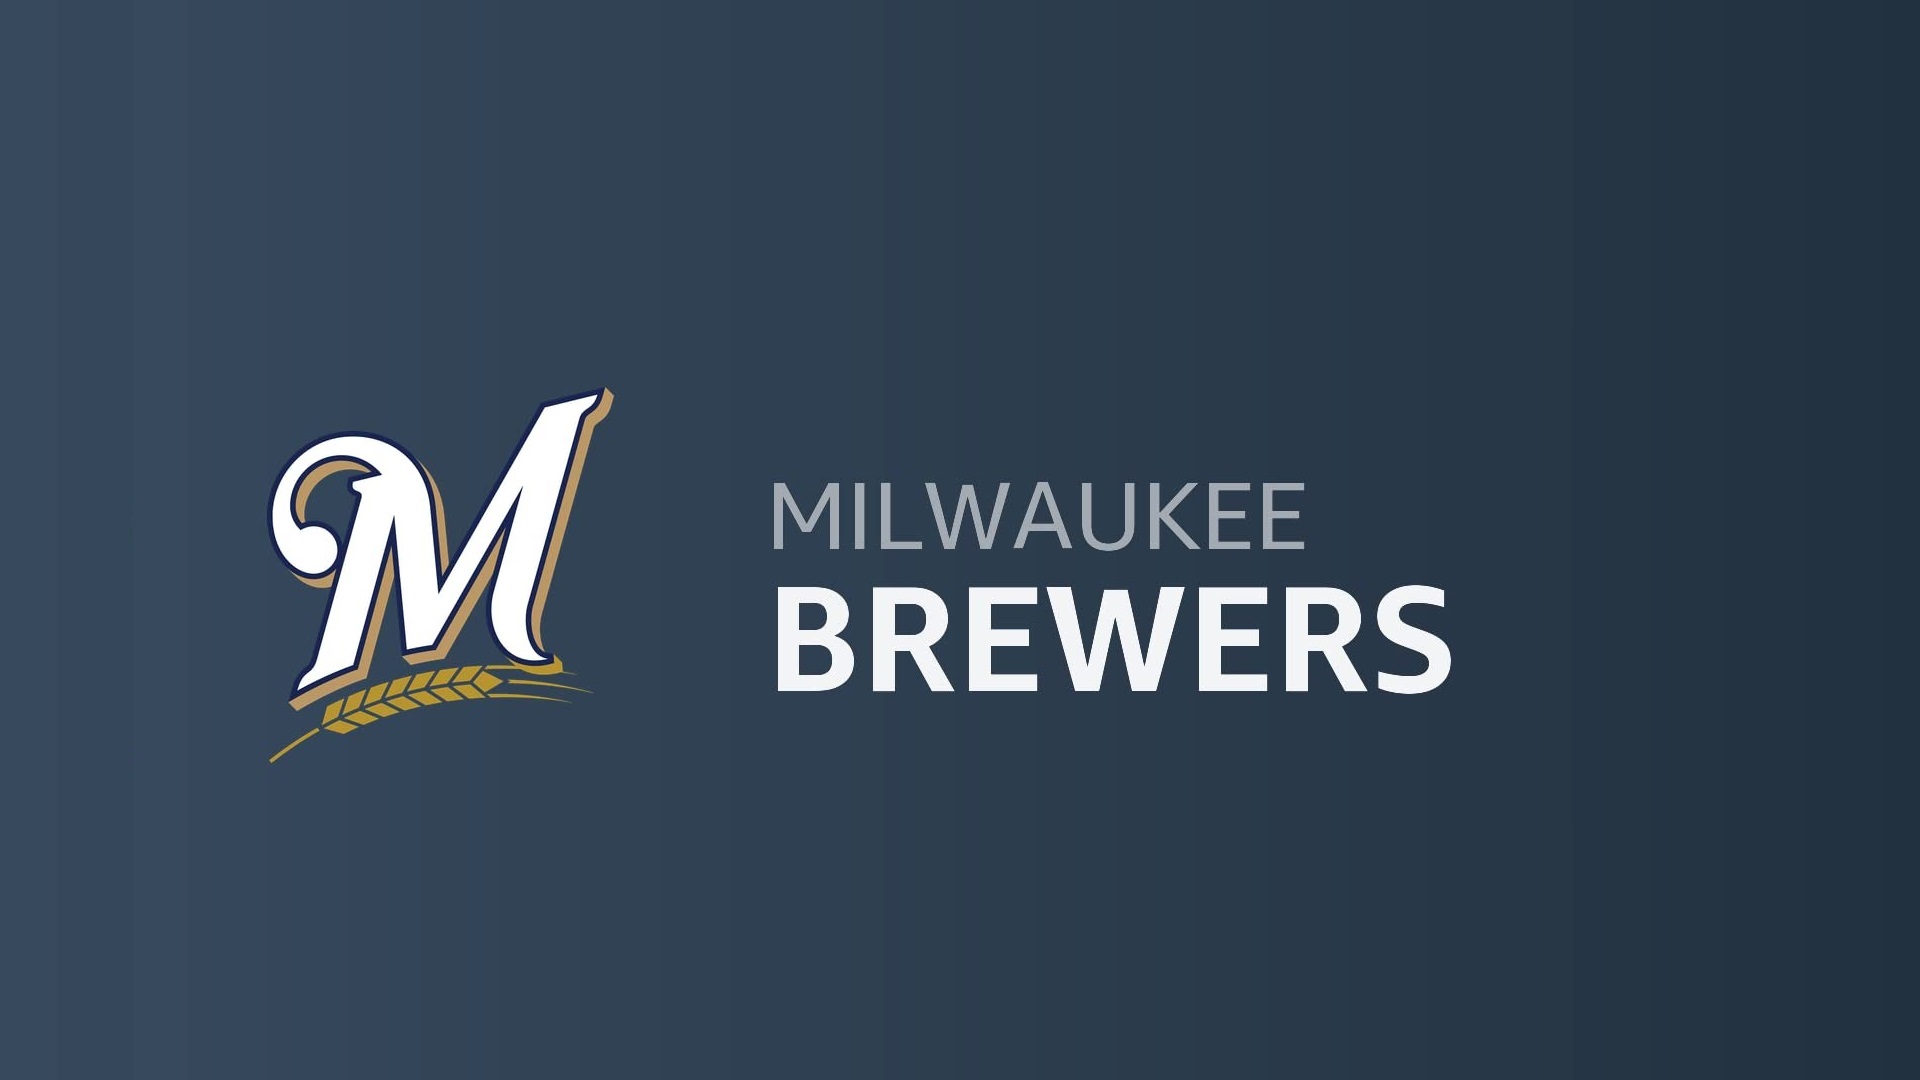 Milwaukee Brewers Wallpaper HD With high-resolution 1920X1080 pixel. You can use this wallpaper for Mac Desktop Wallpaper, Laptop Screensavers, Android Wallpapers, Tablet or iPhone Home Screen and another mobile phone device